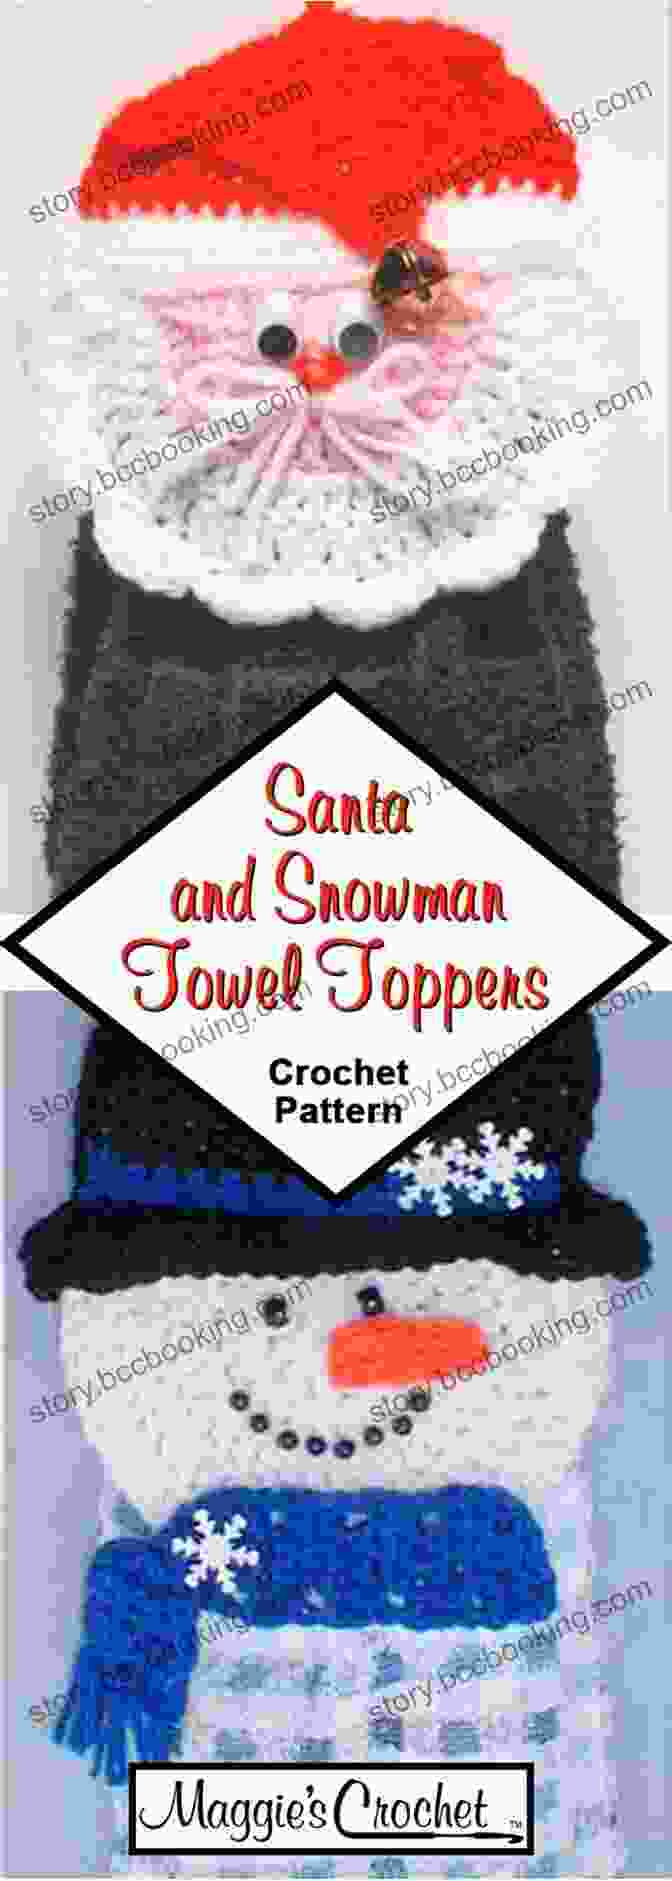 A Vibrant Display Of Crochet Pattern Santa Snowman Towel Toppers Ps070, Showcasing Their Intricate Details And Festive Charm. Crochet Pattern Santa Snowman Towel Toppers PS070 R